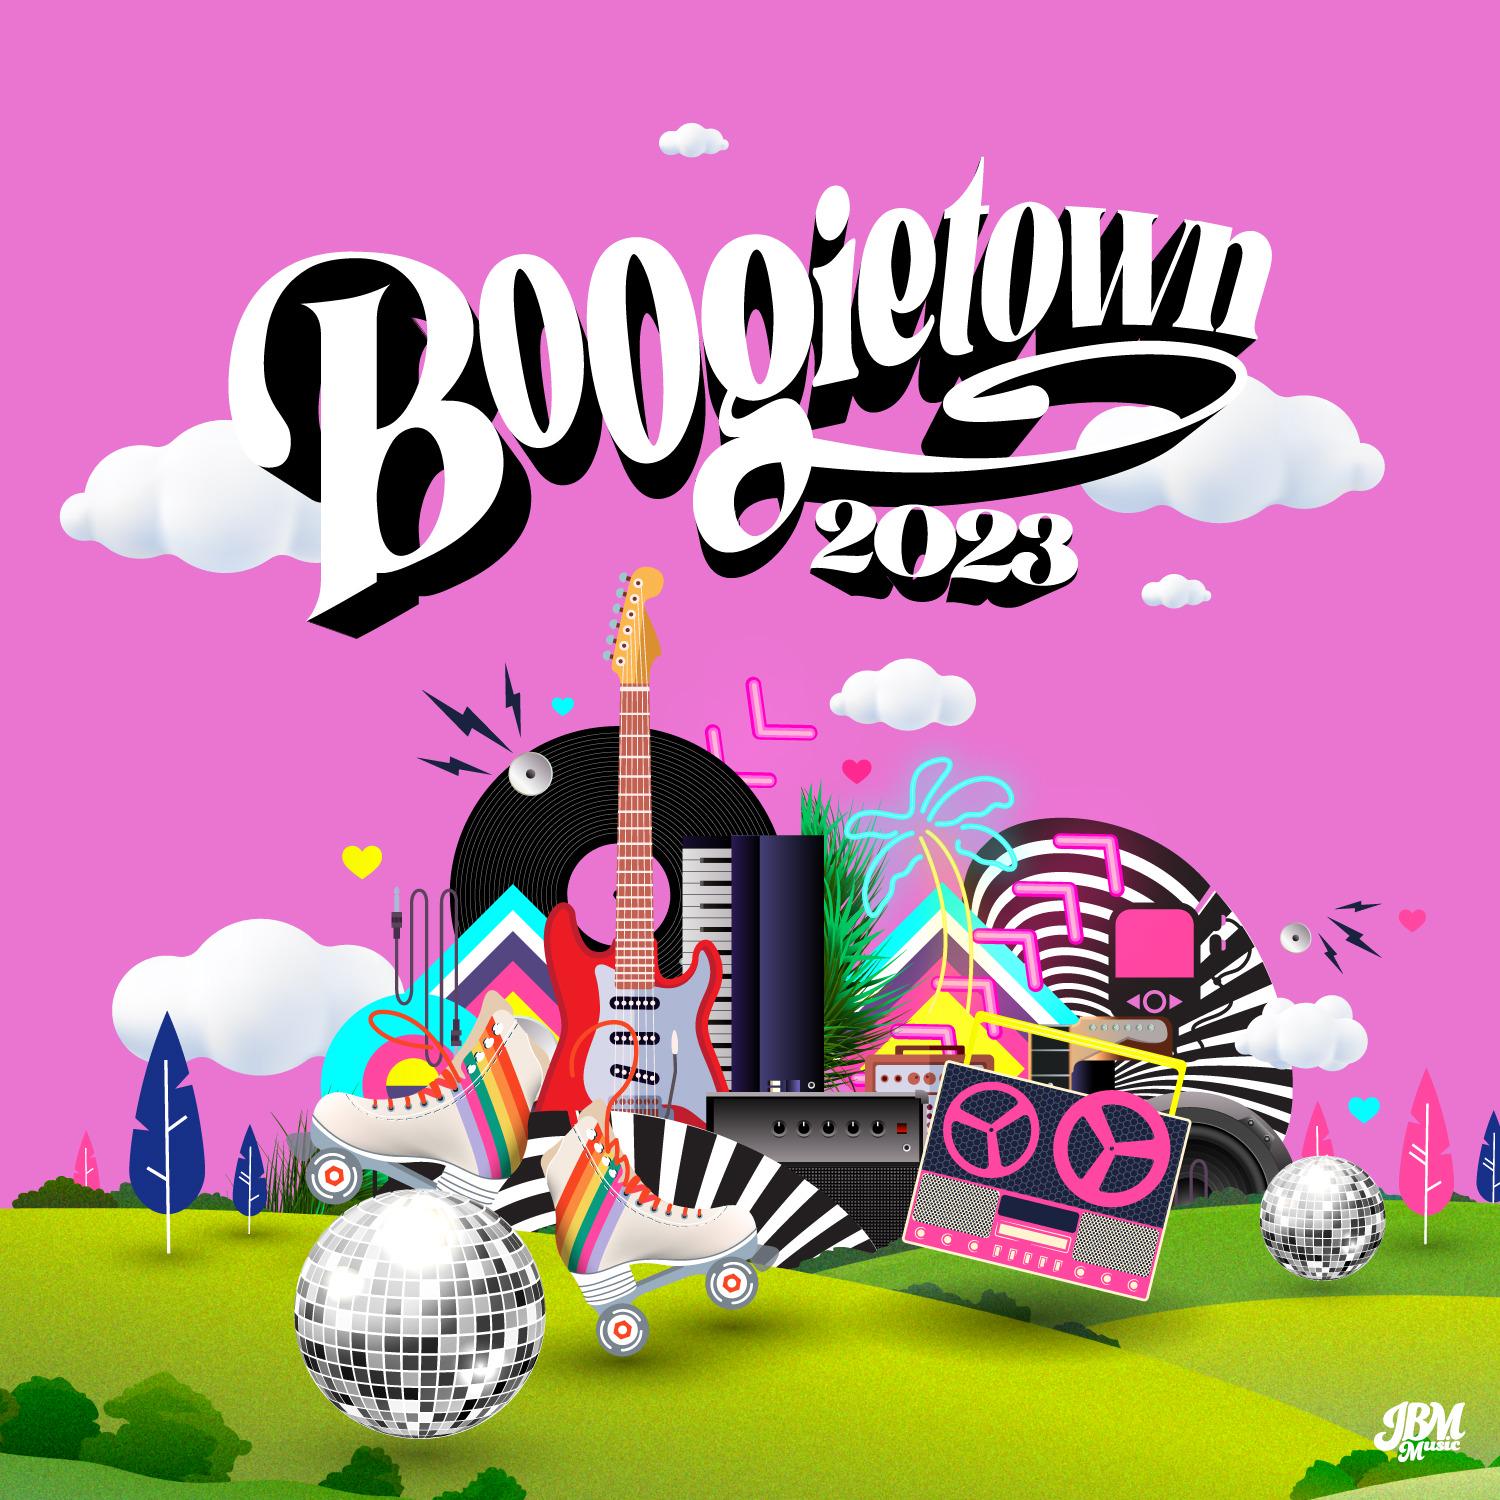 Boogietown Festival Lineup, Dates and Location